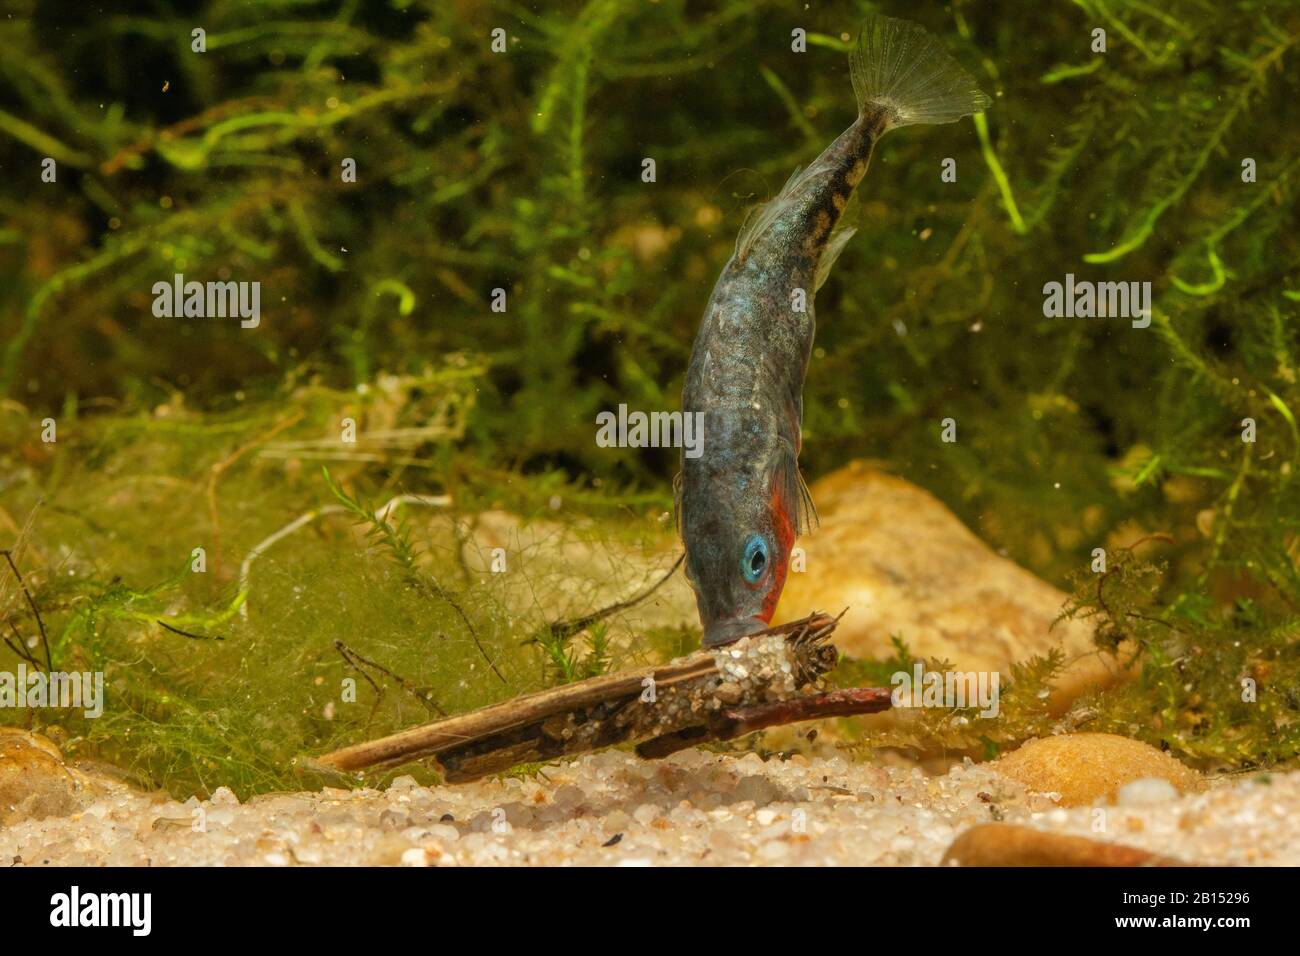 three-spined stickleback (Gasterosteus aculeatus), male defencing nest with larvae, attacking caddis fly larva, Germany Stock Photo